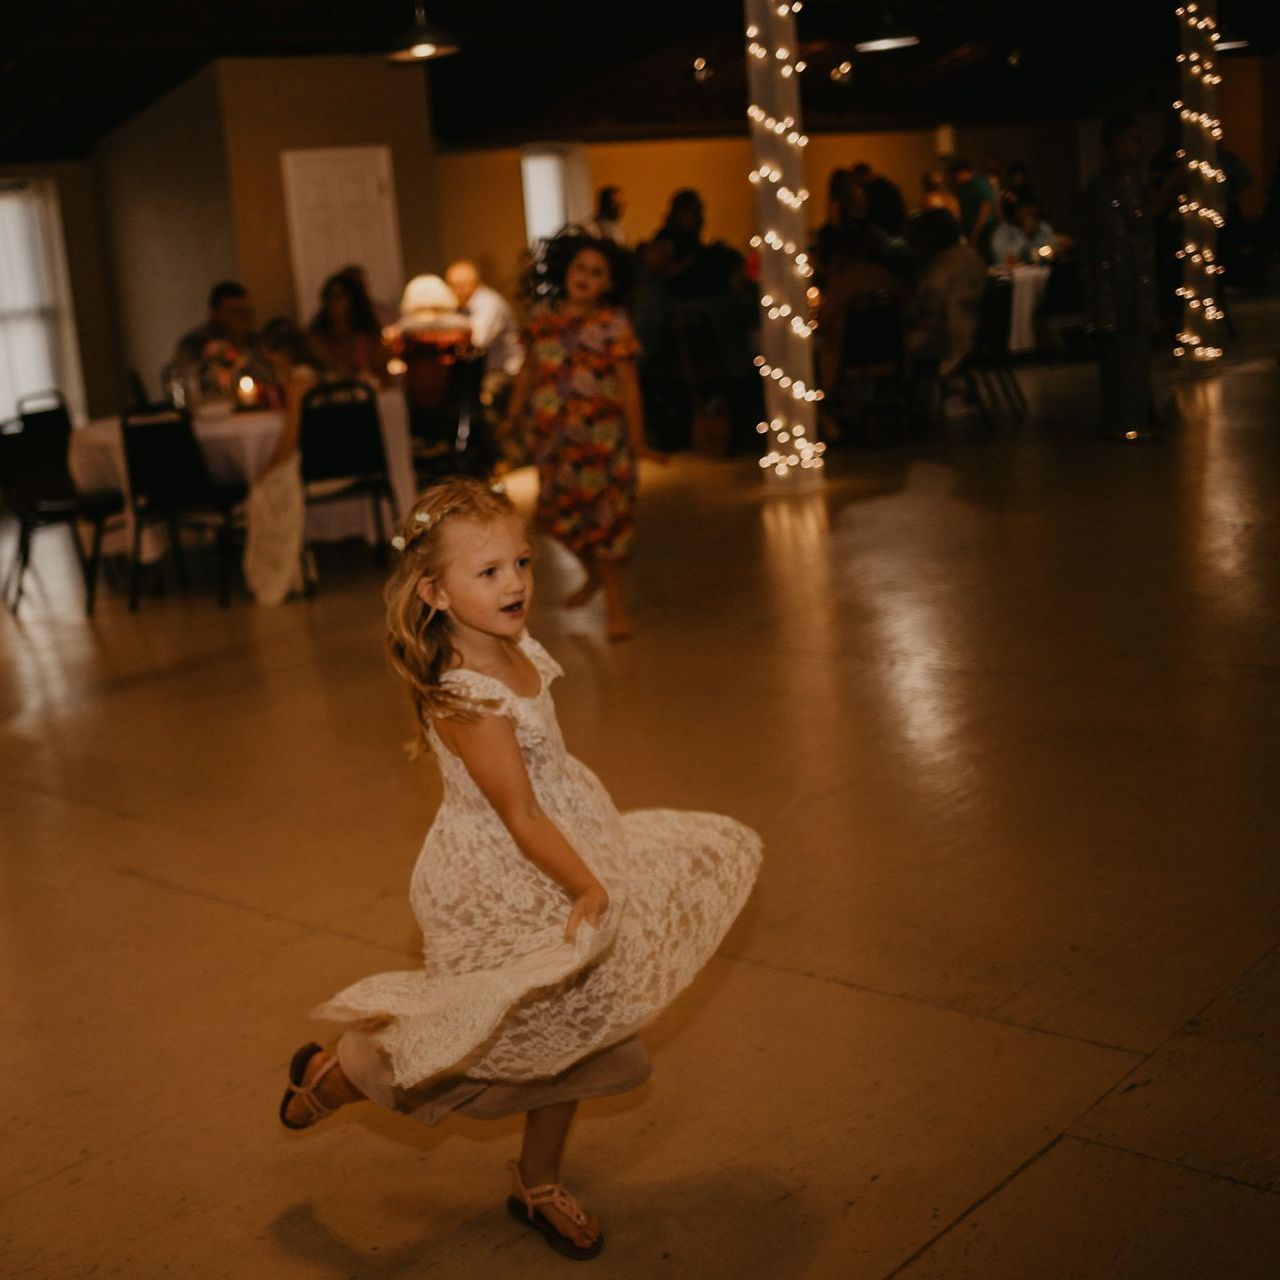 a little girl in a white dress is dancing on a dance floor at a wedding reception .